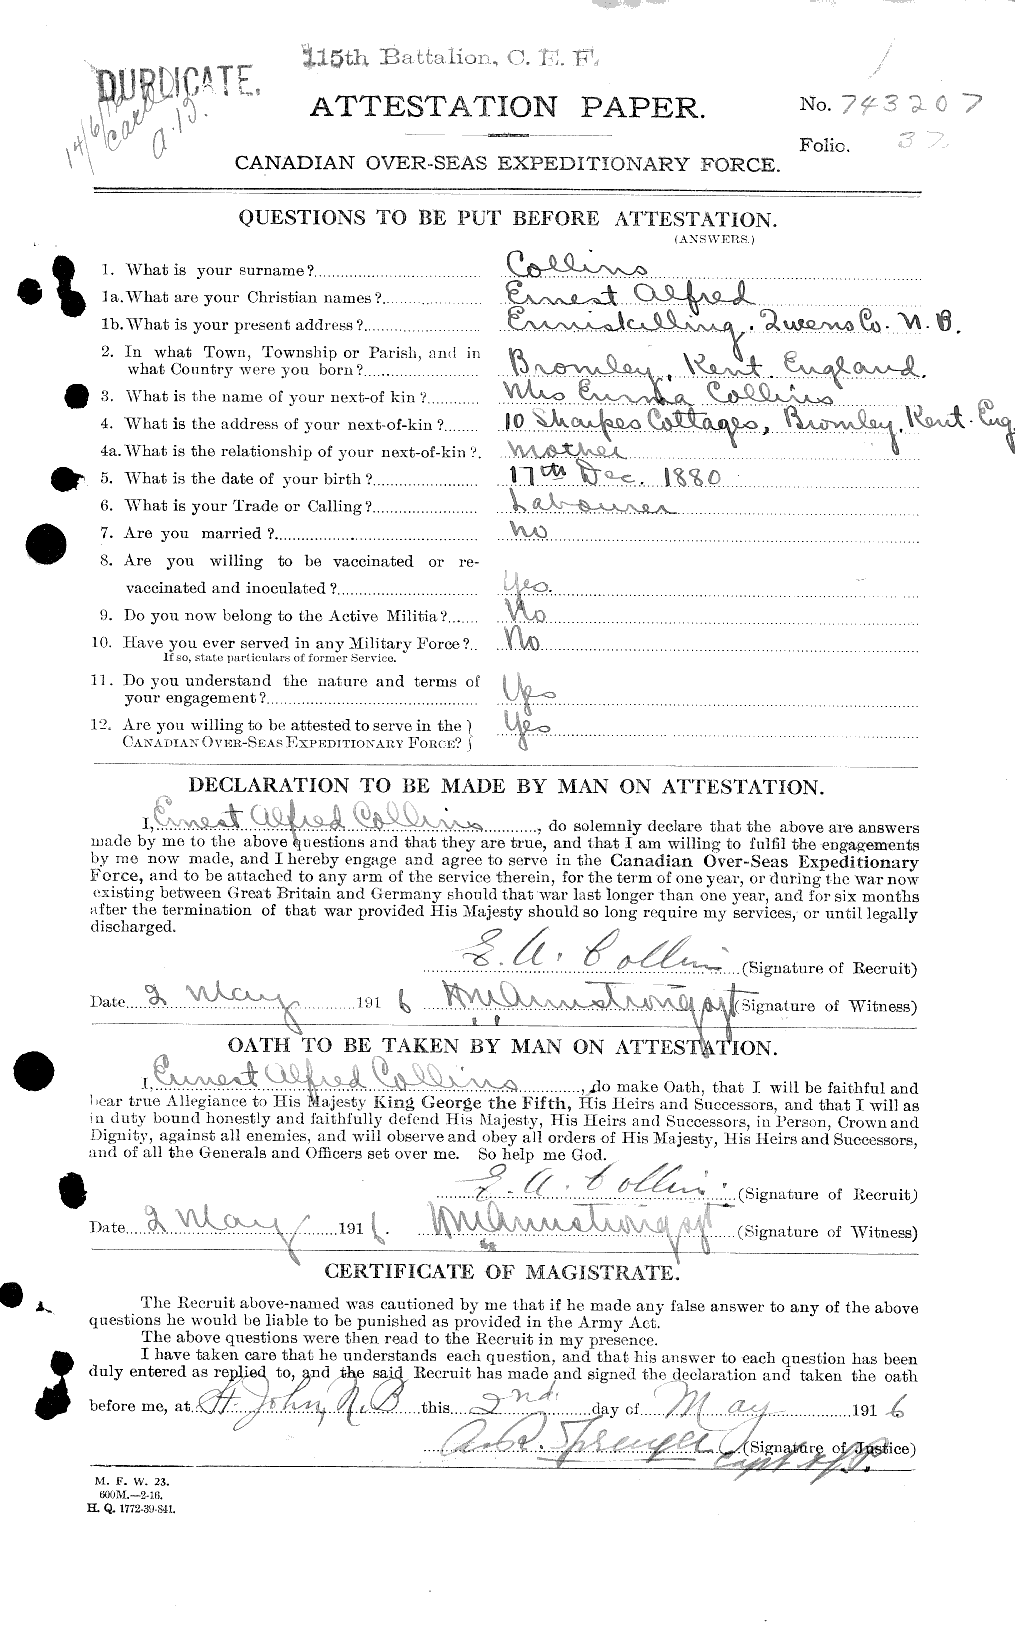 Personnel Records of the First World War - CEF 037769a